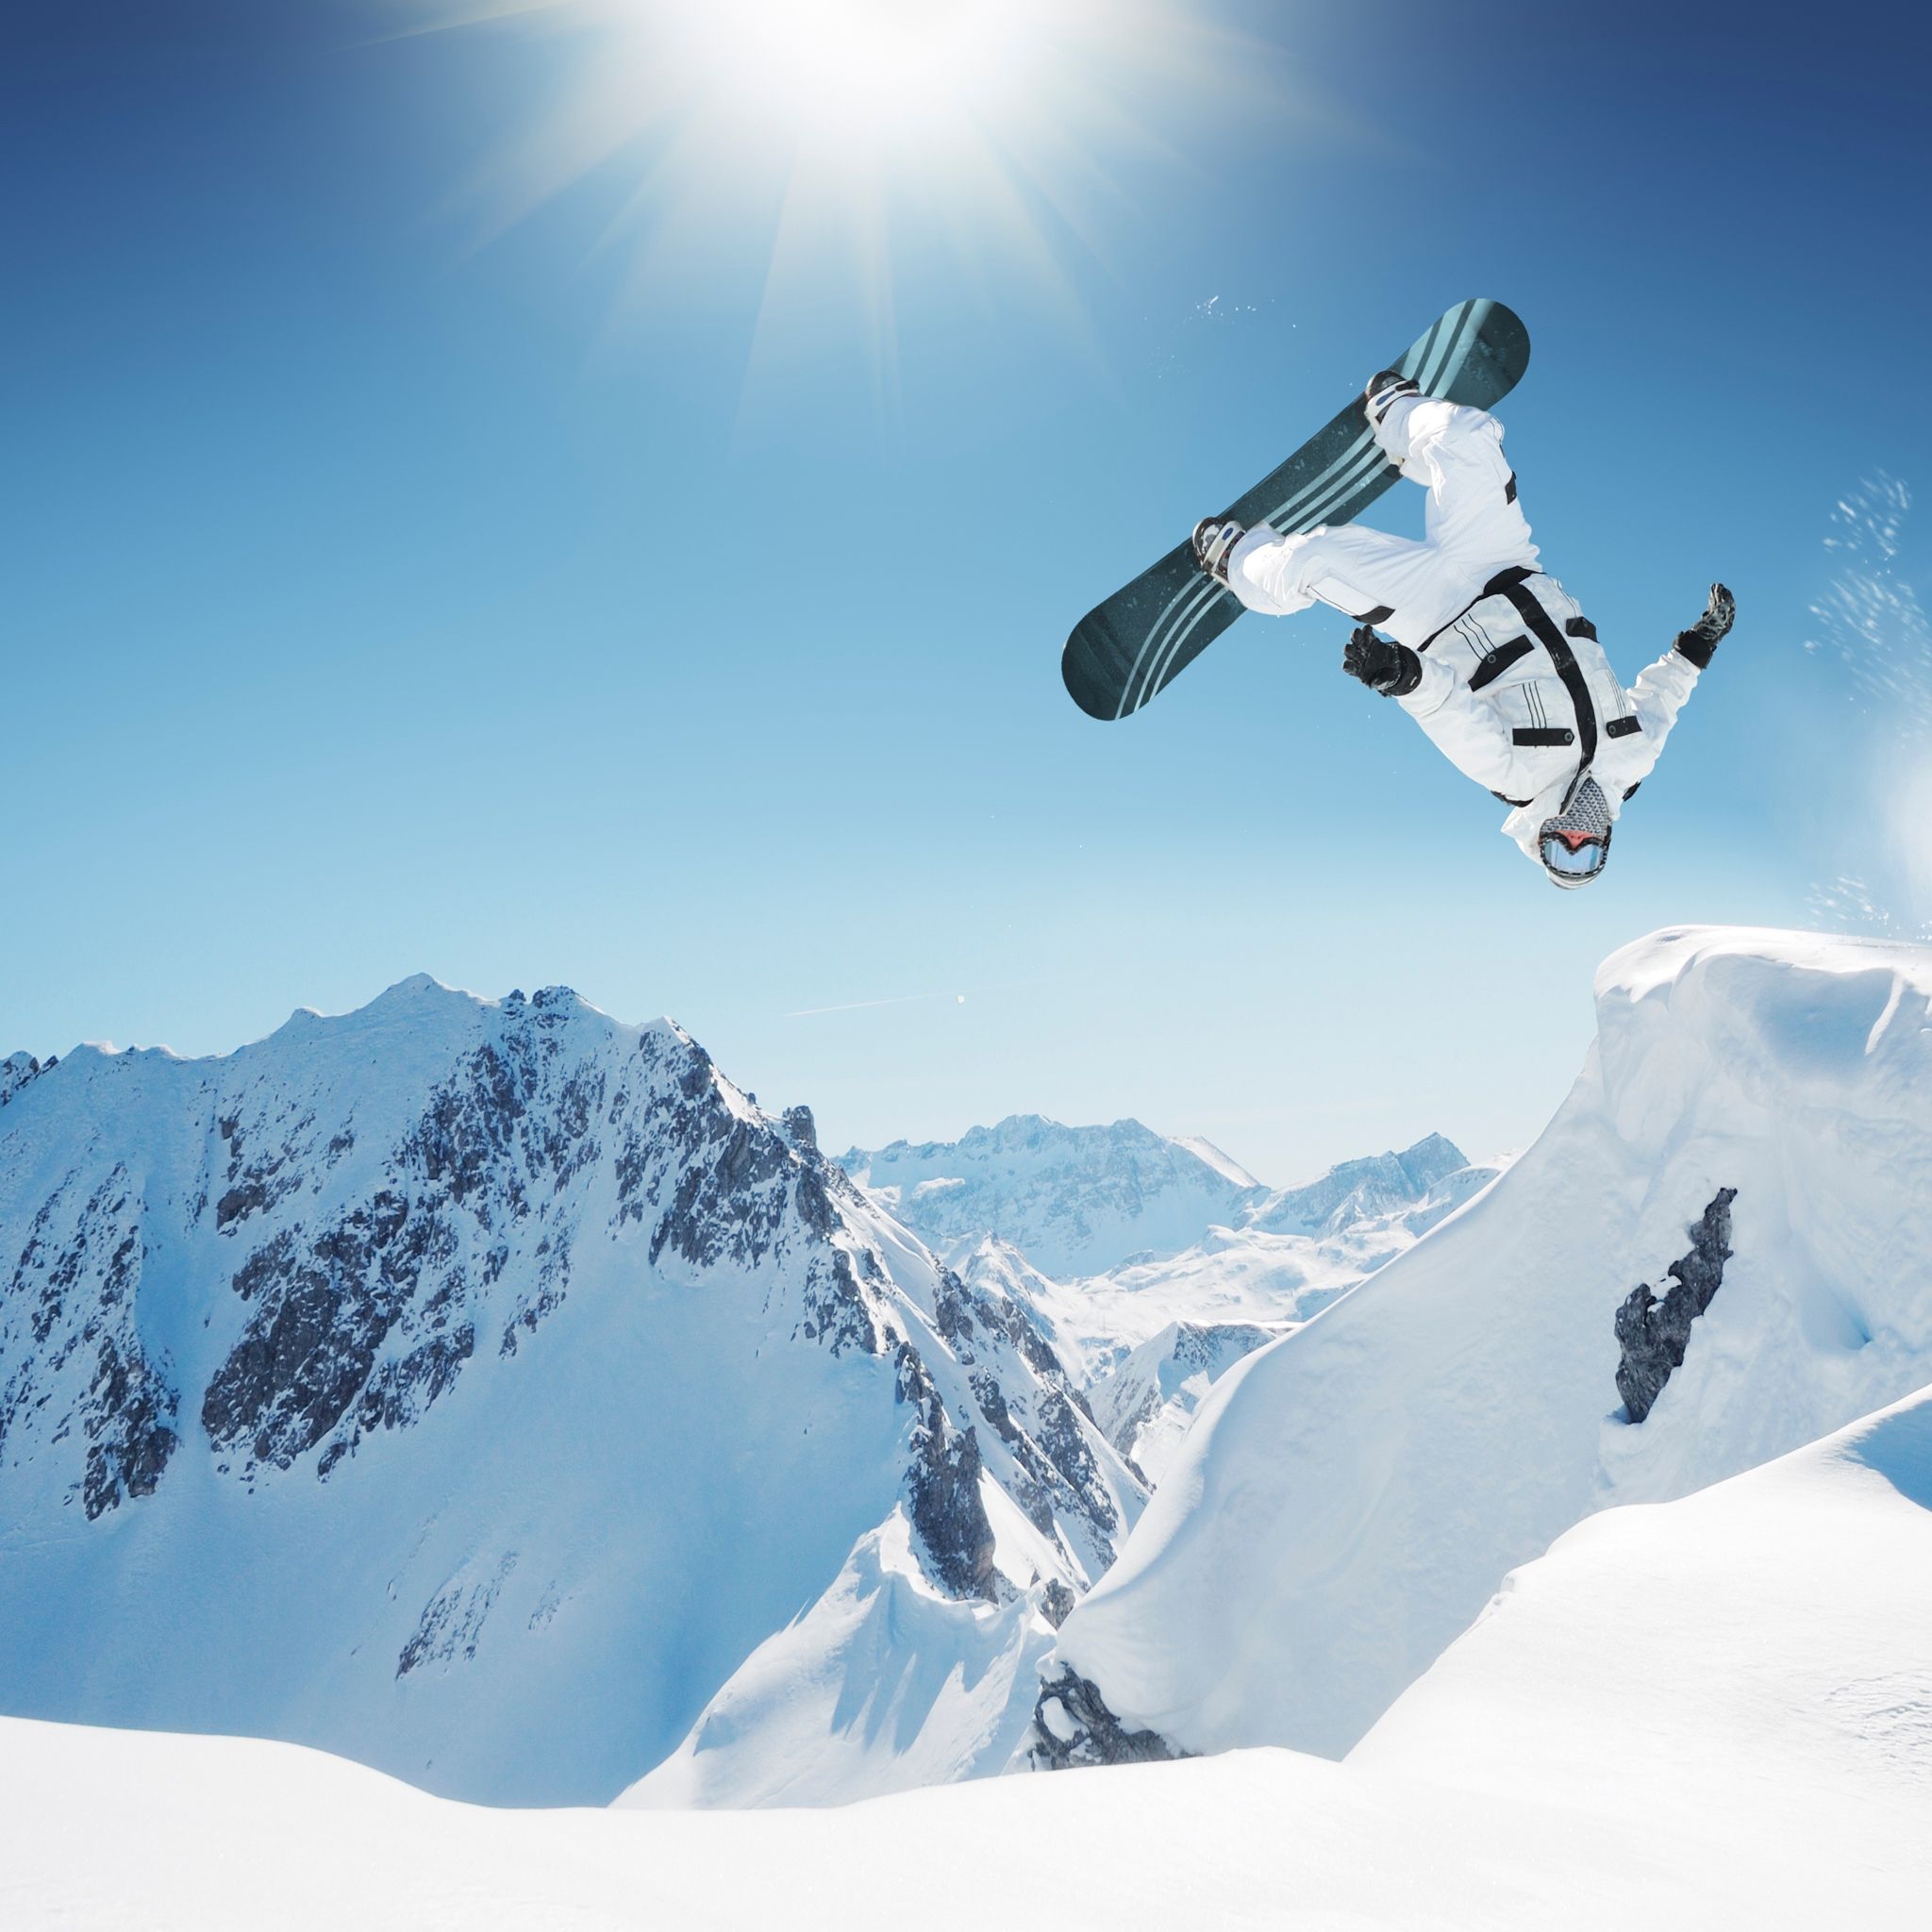 3Wallpapers | Best Wallpapers for all iPhone Retina » Snowboard ...